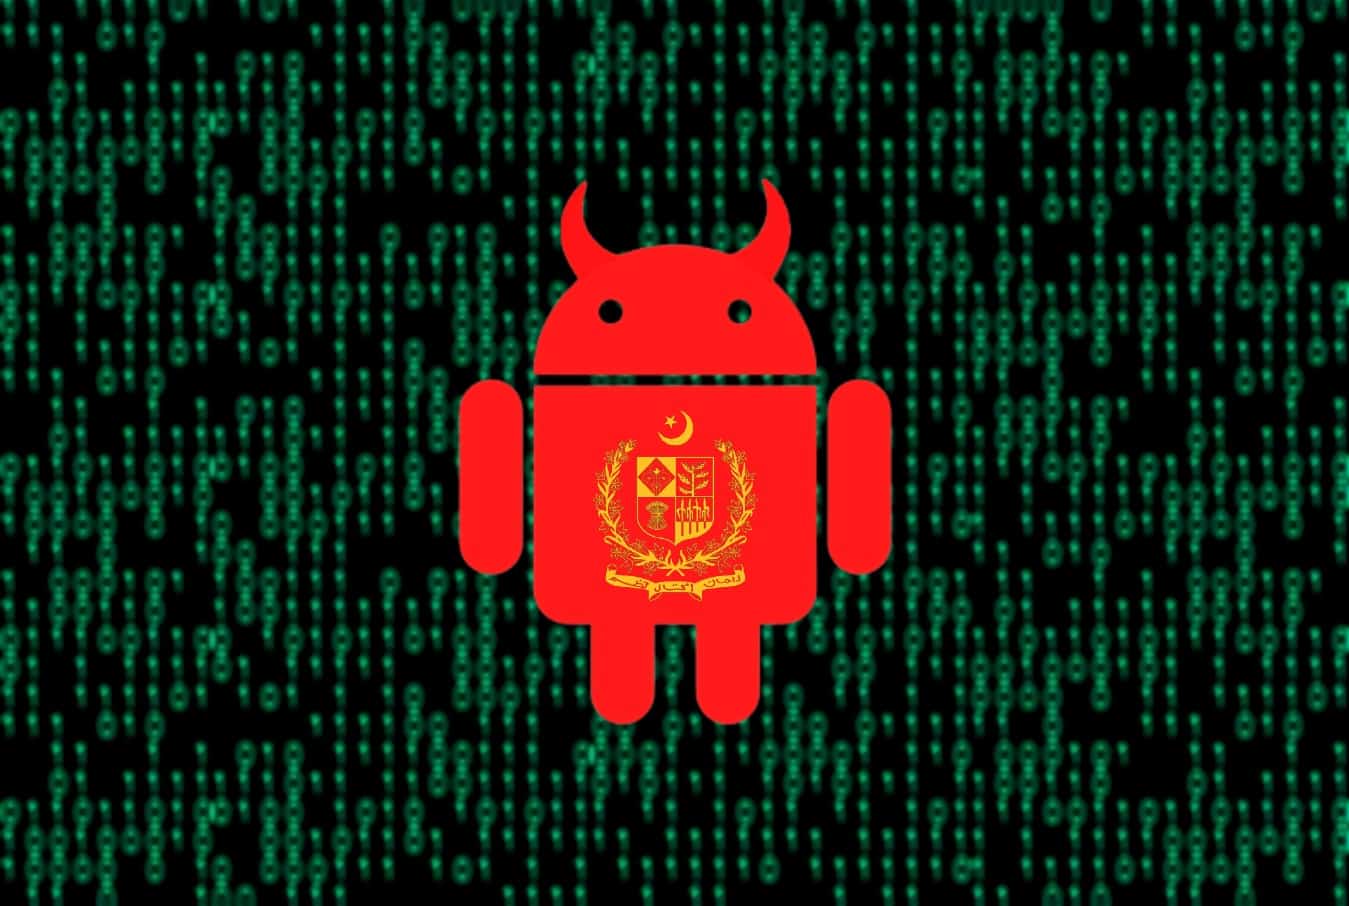 Pakistani Android users hit by spyware campaign with malicious apps